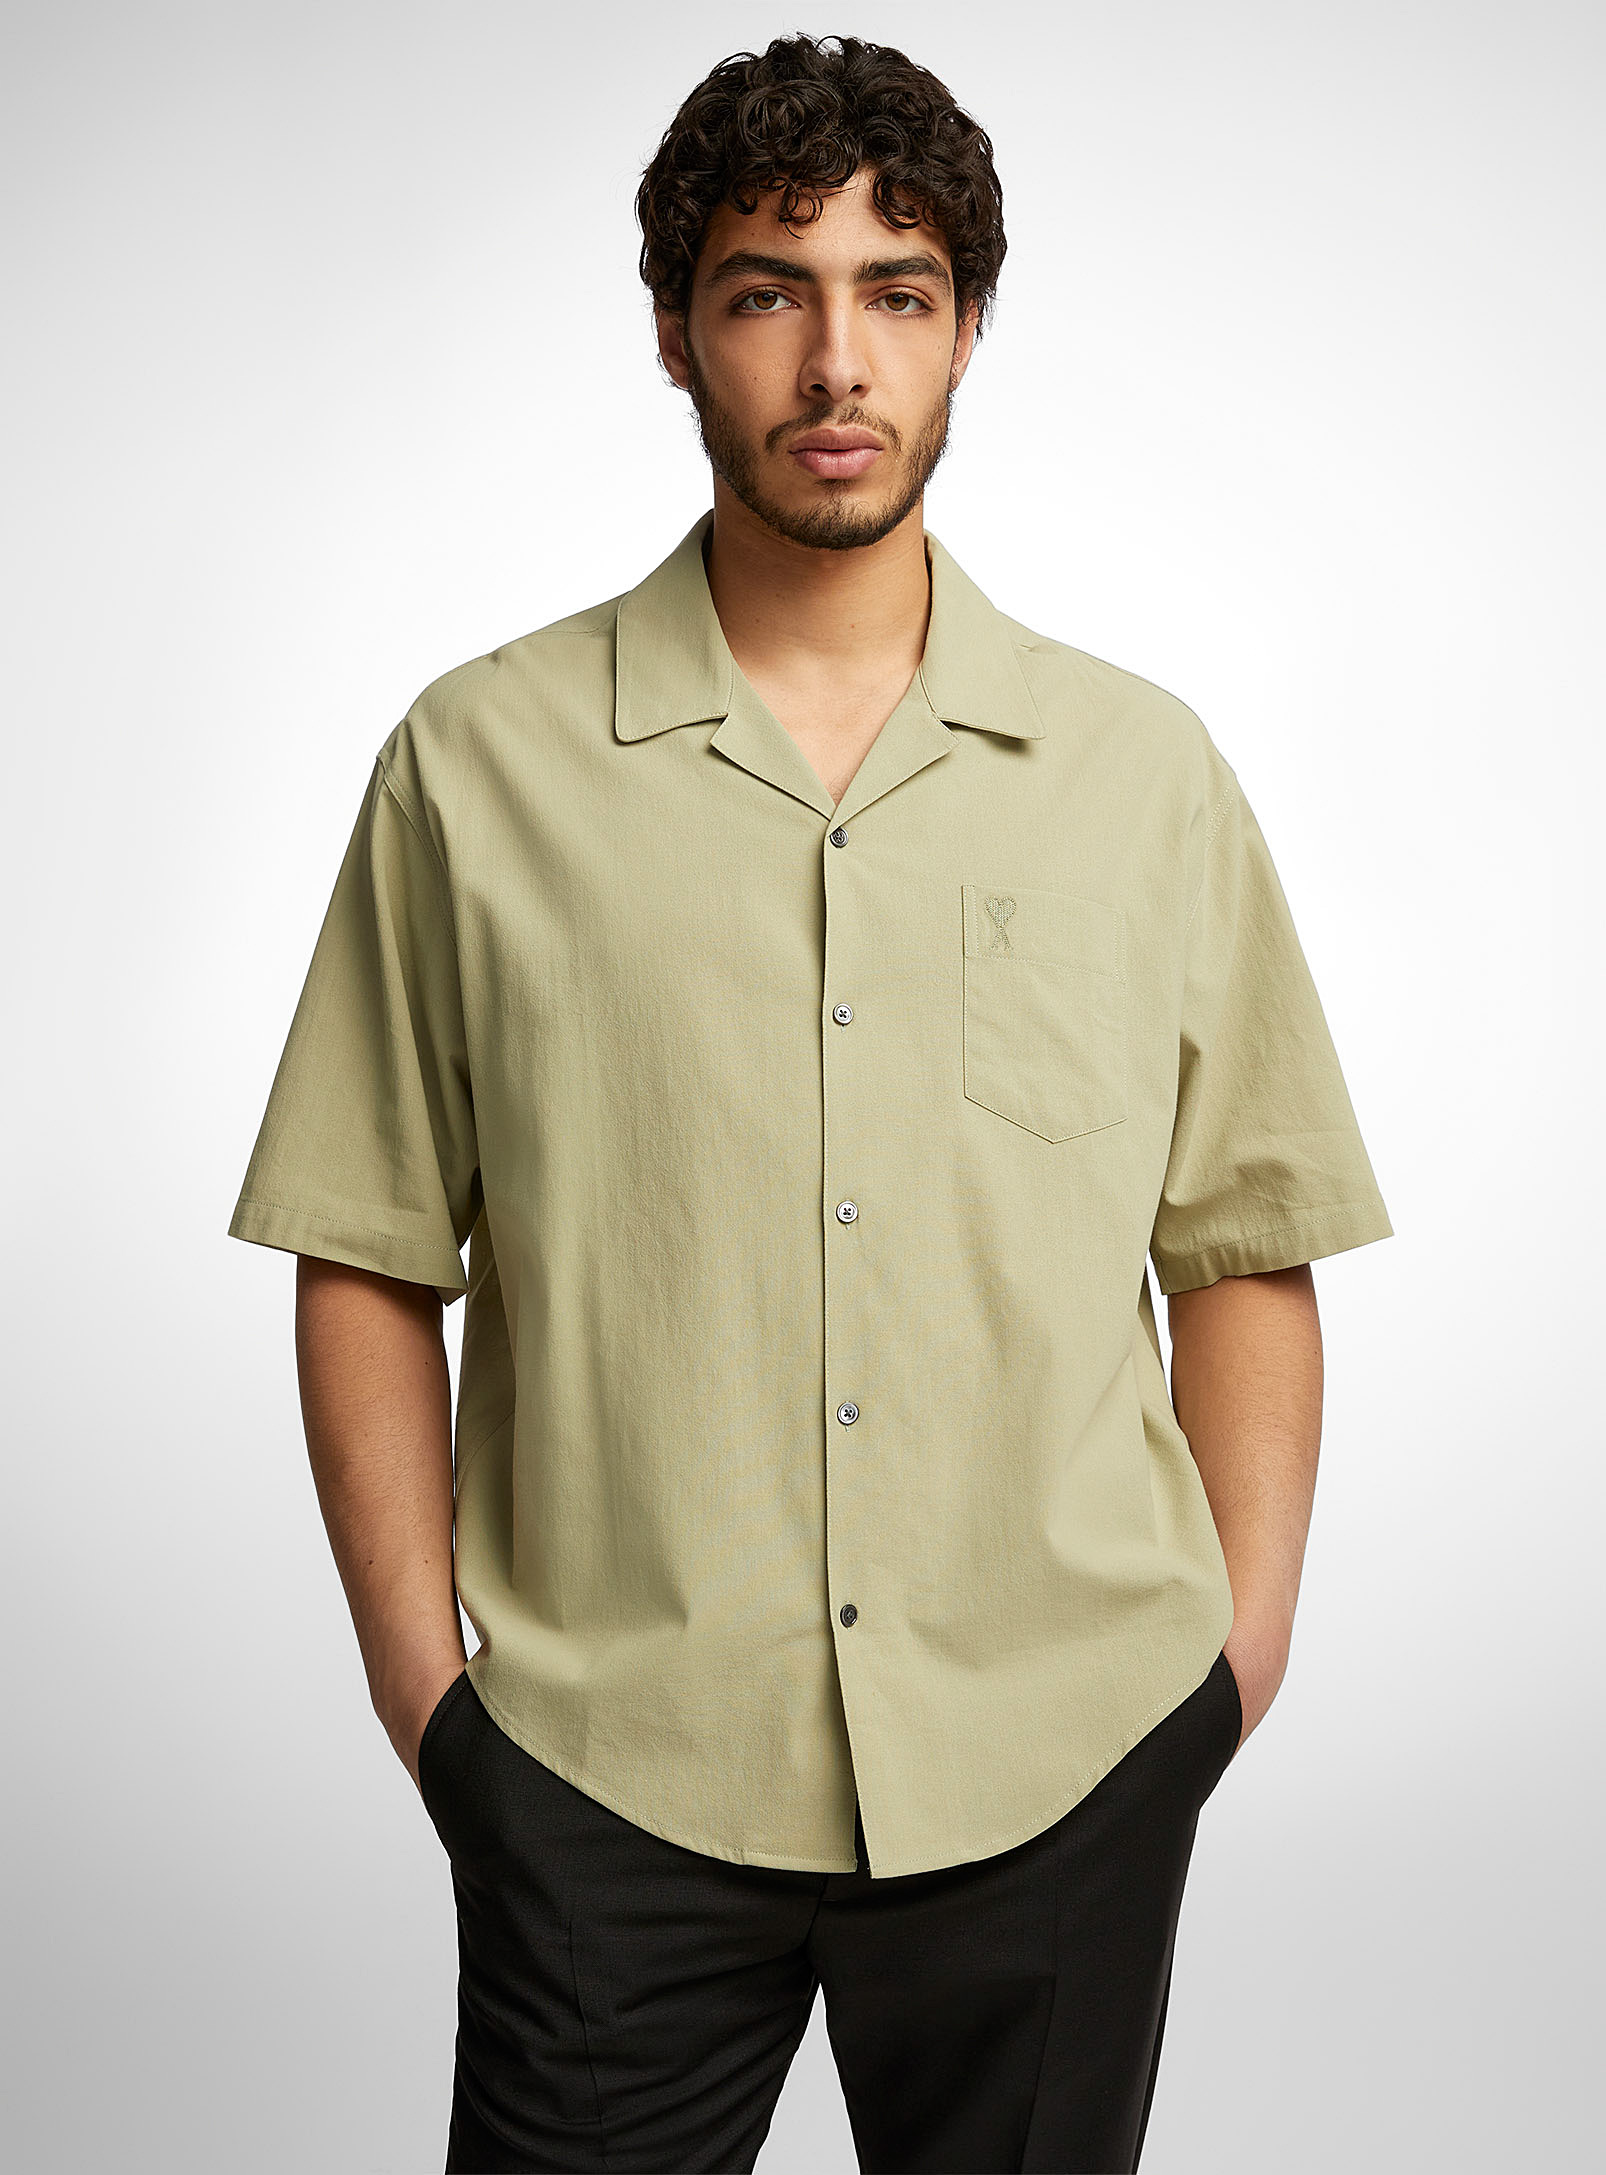 Ami - Men's Embroidered pocket casual shirt